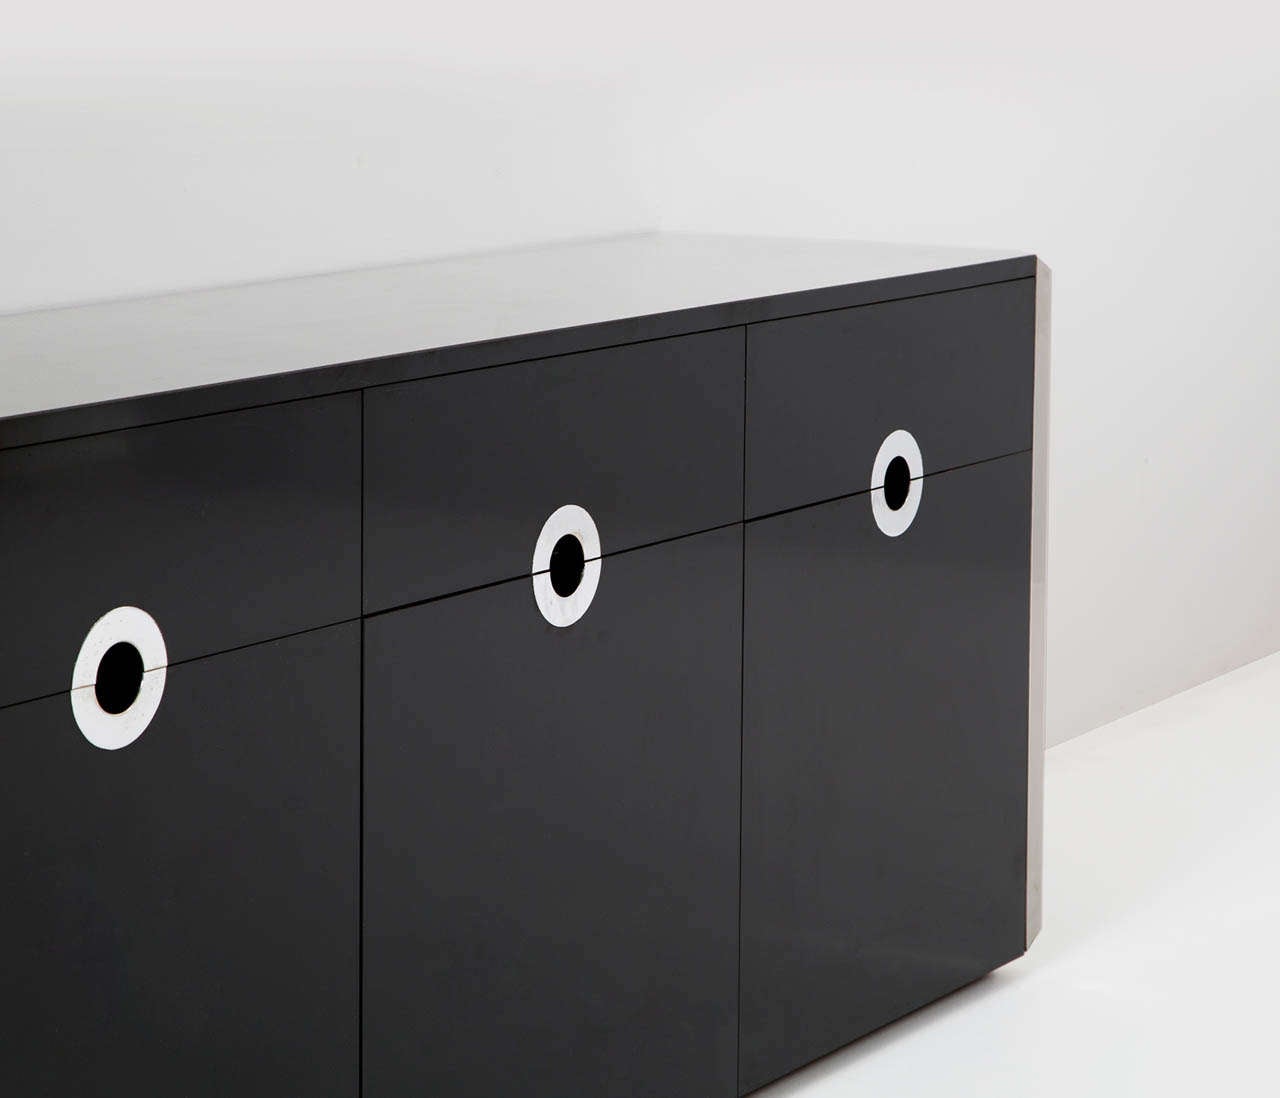 Mid-Century Modern Black High Gloss Three-Door Sideboard, style of Willy Rizzo, by Mario Sabot